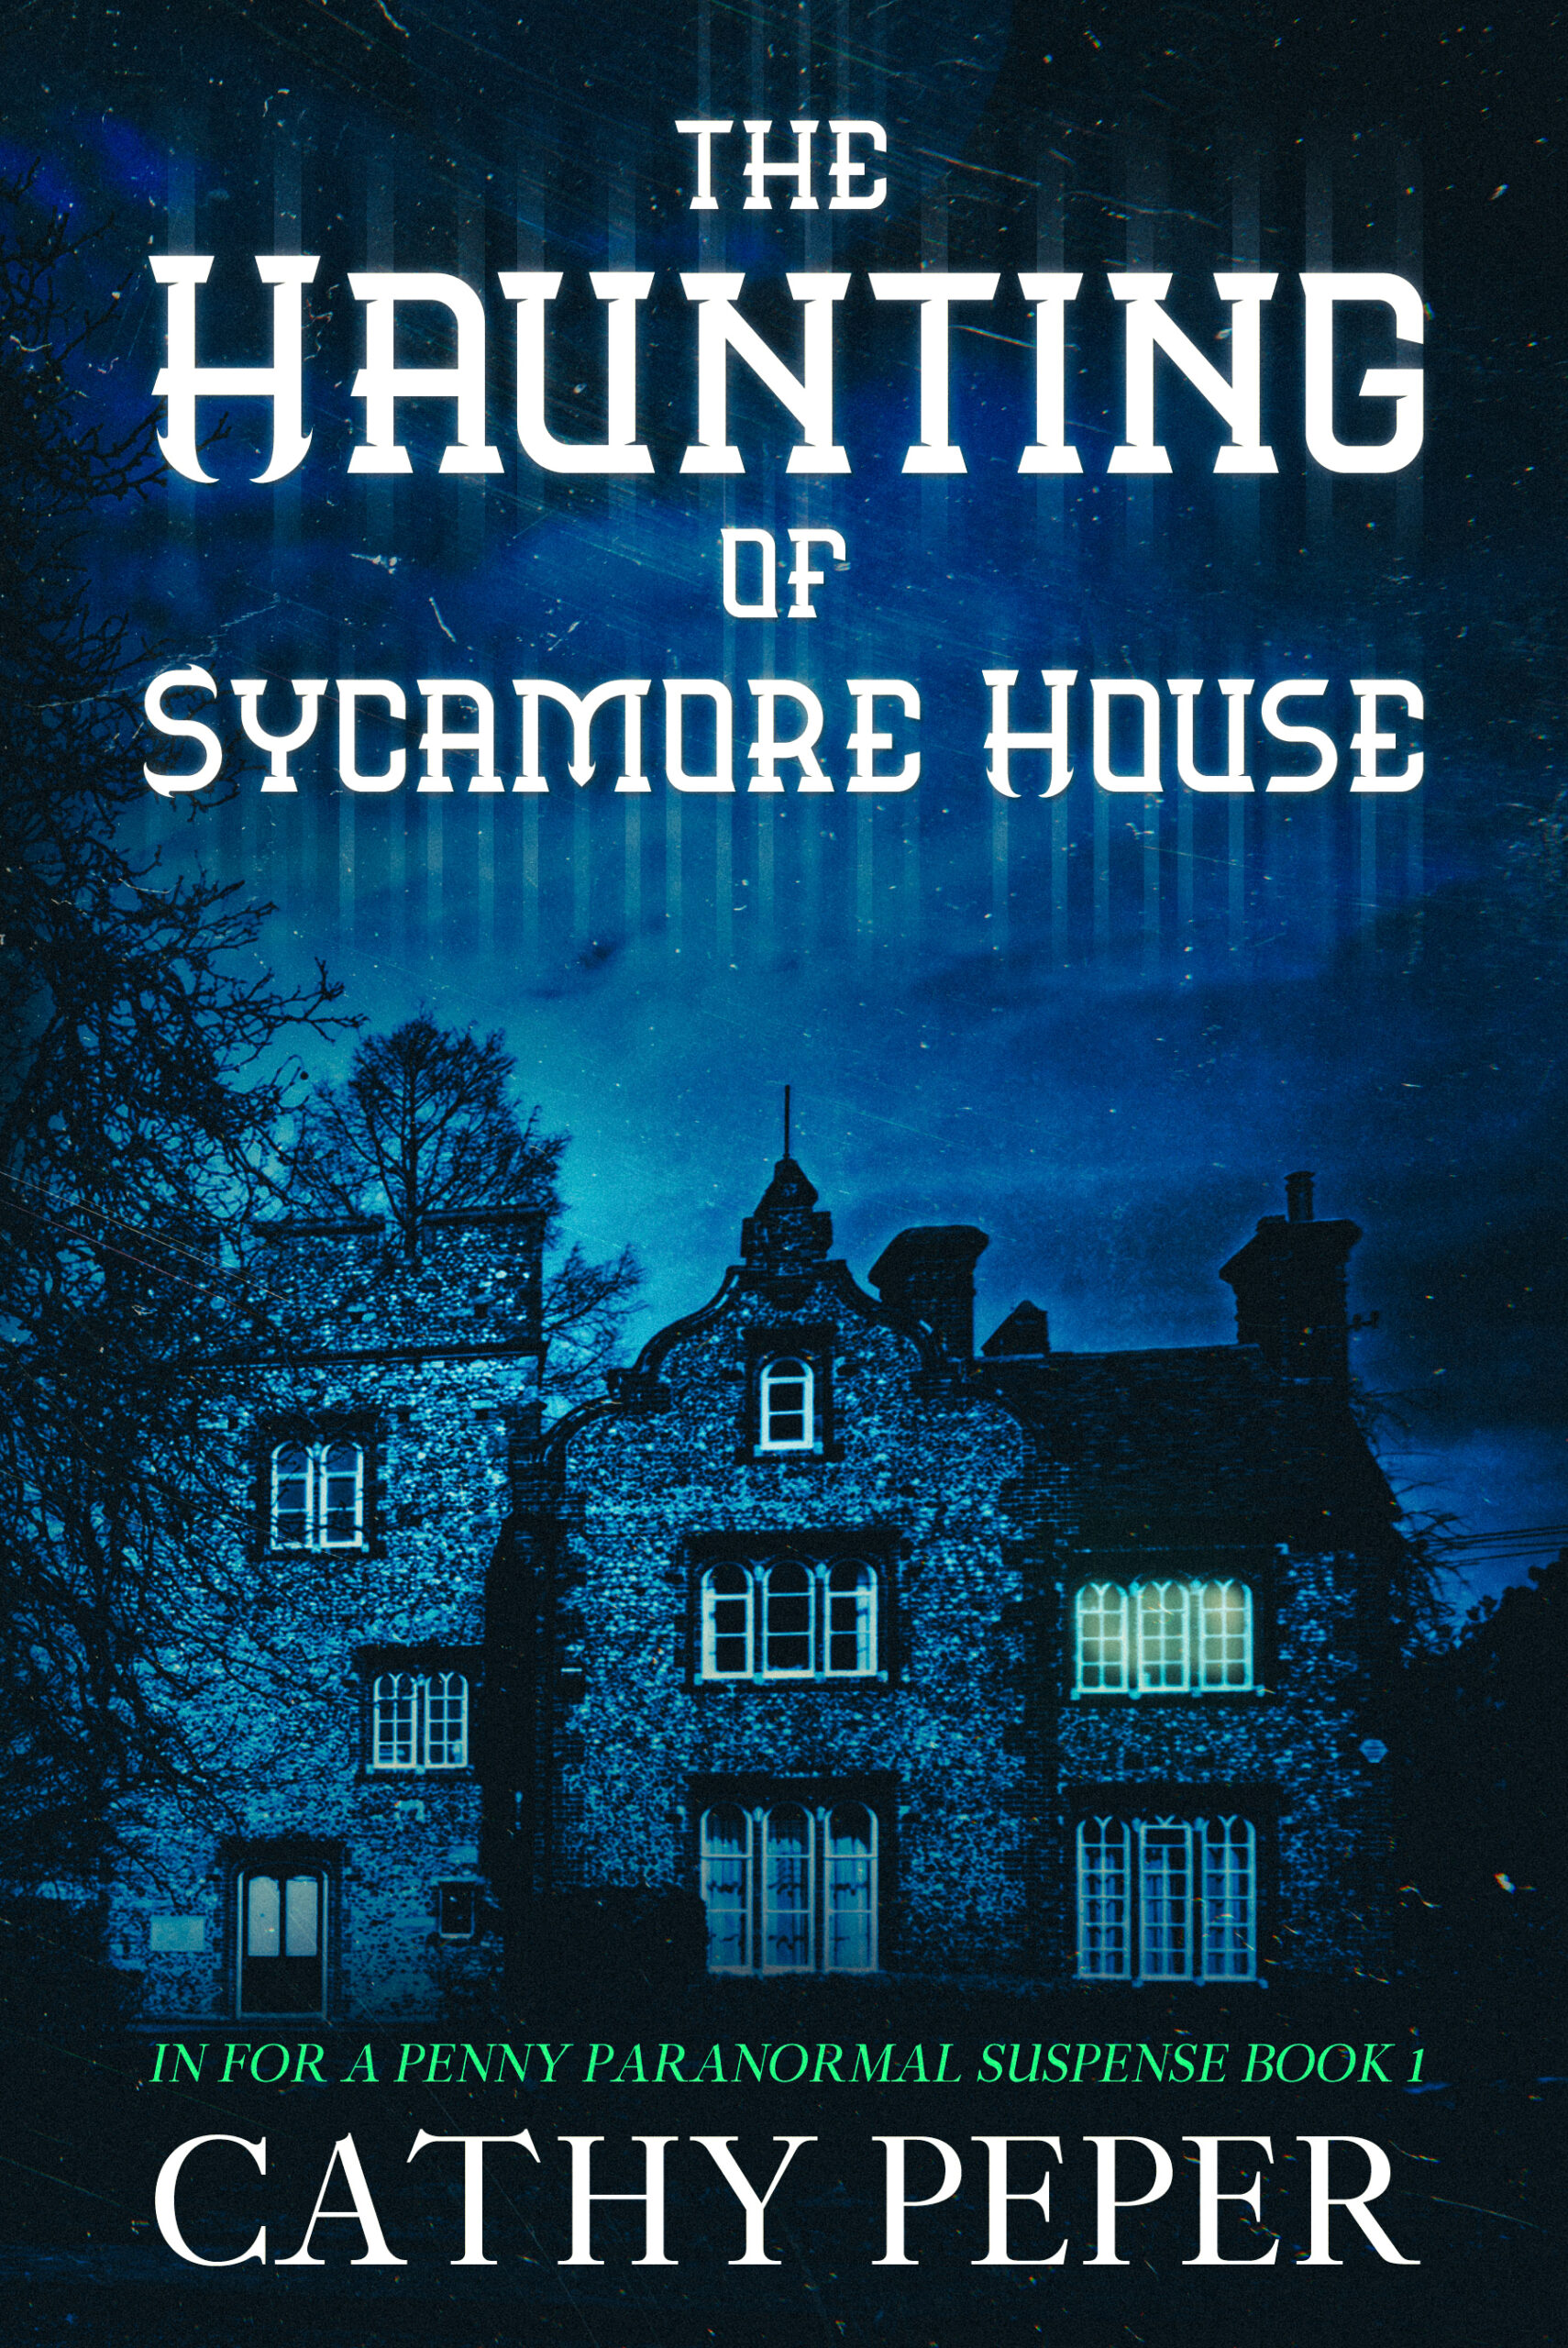 The Haunting of Sycamore House